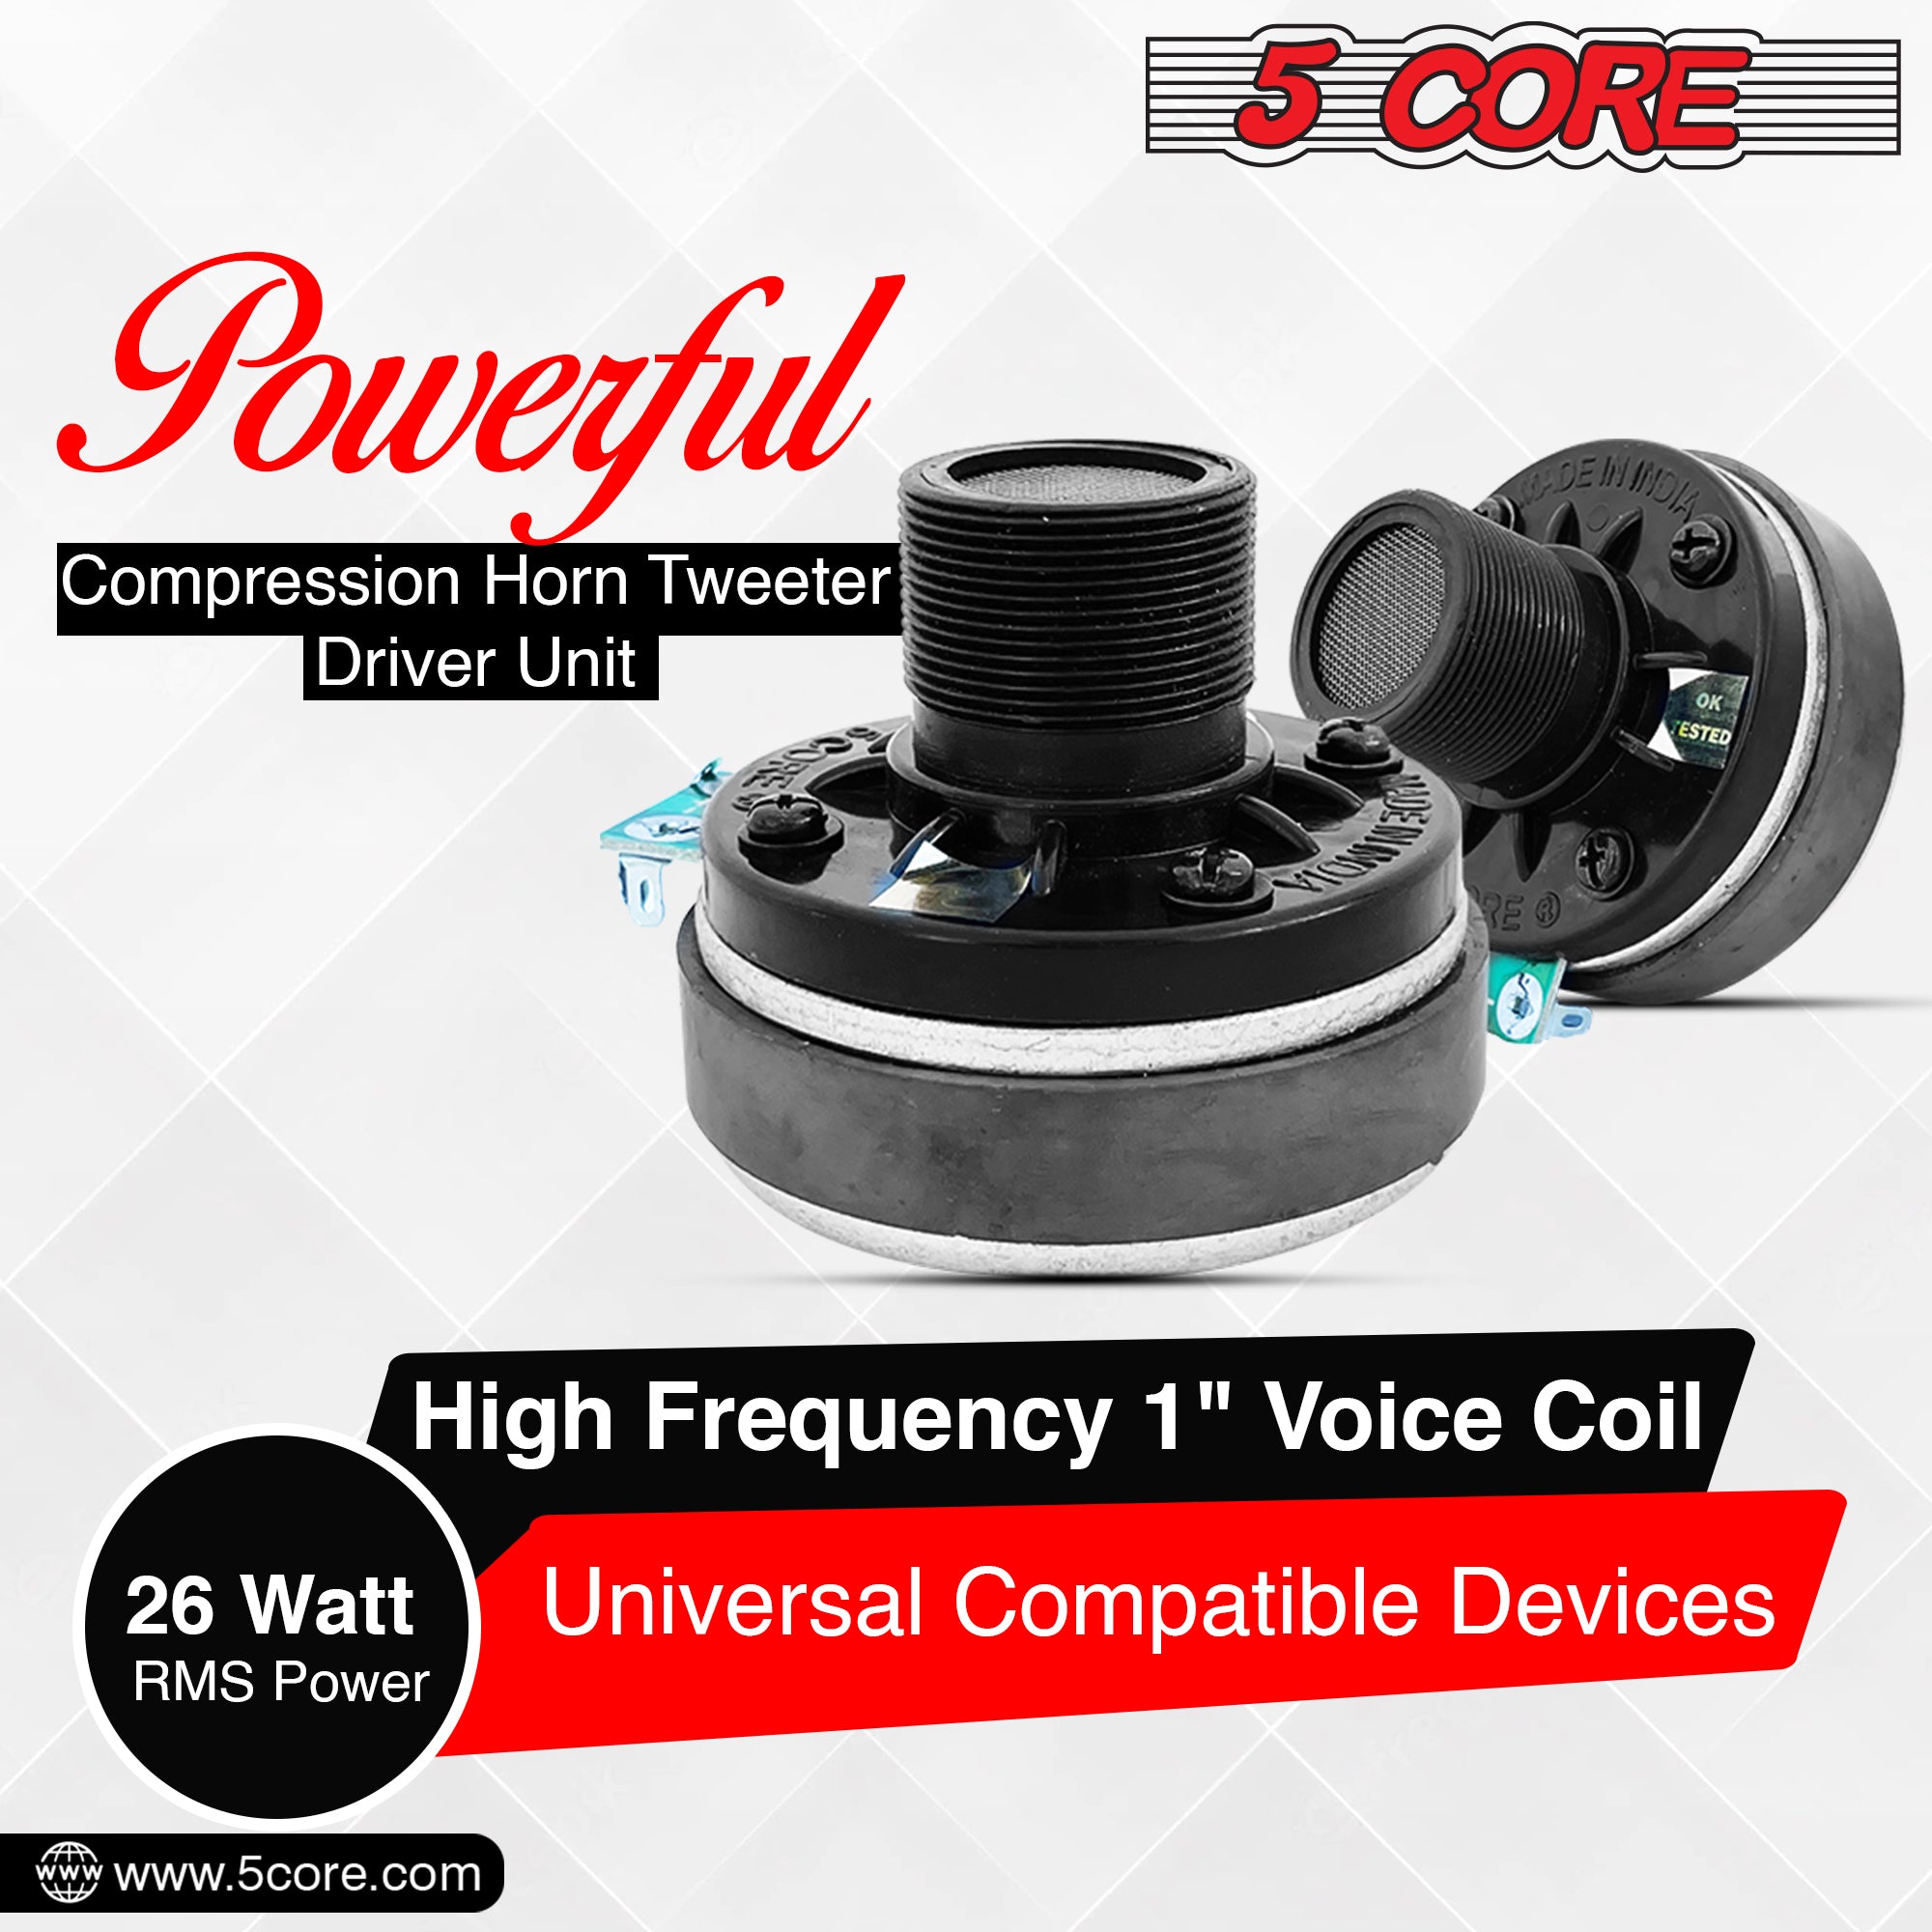 powerful compression horn tweeter driver unit